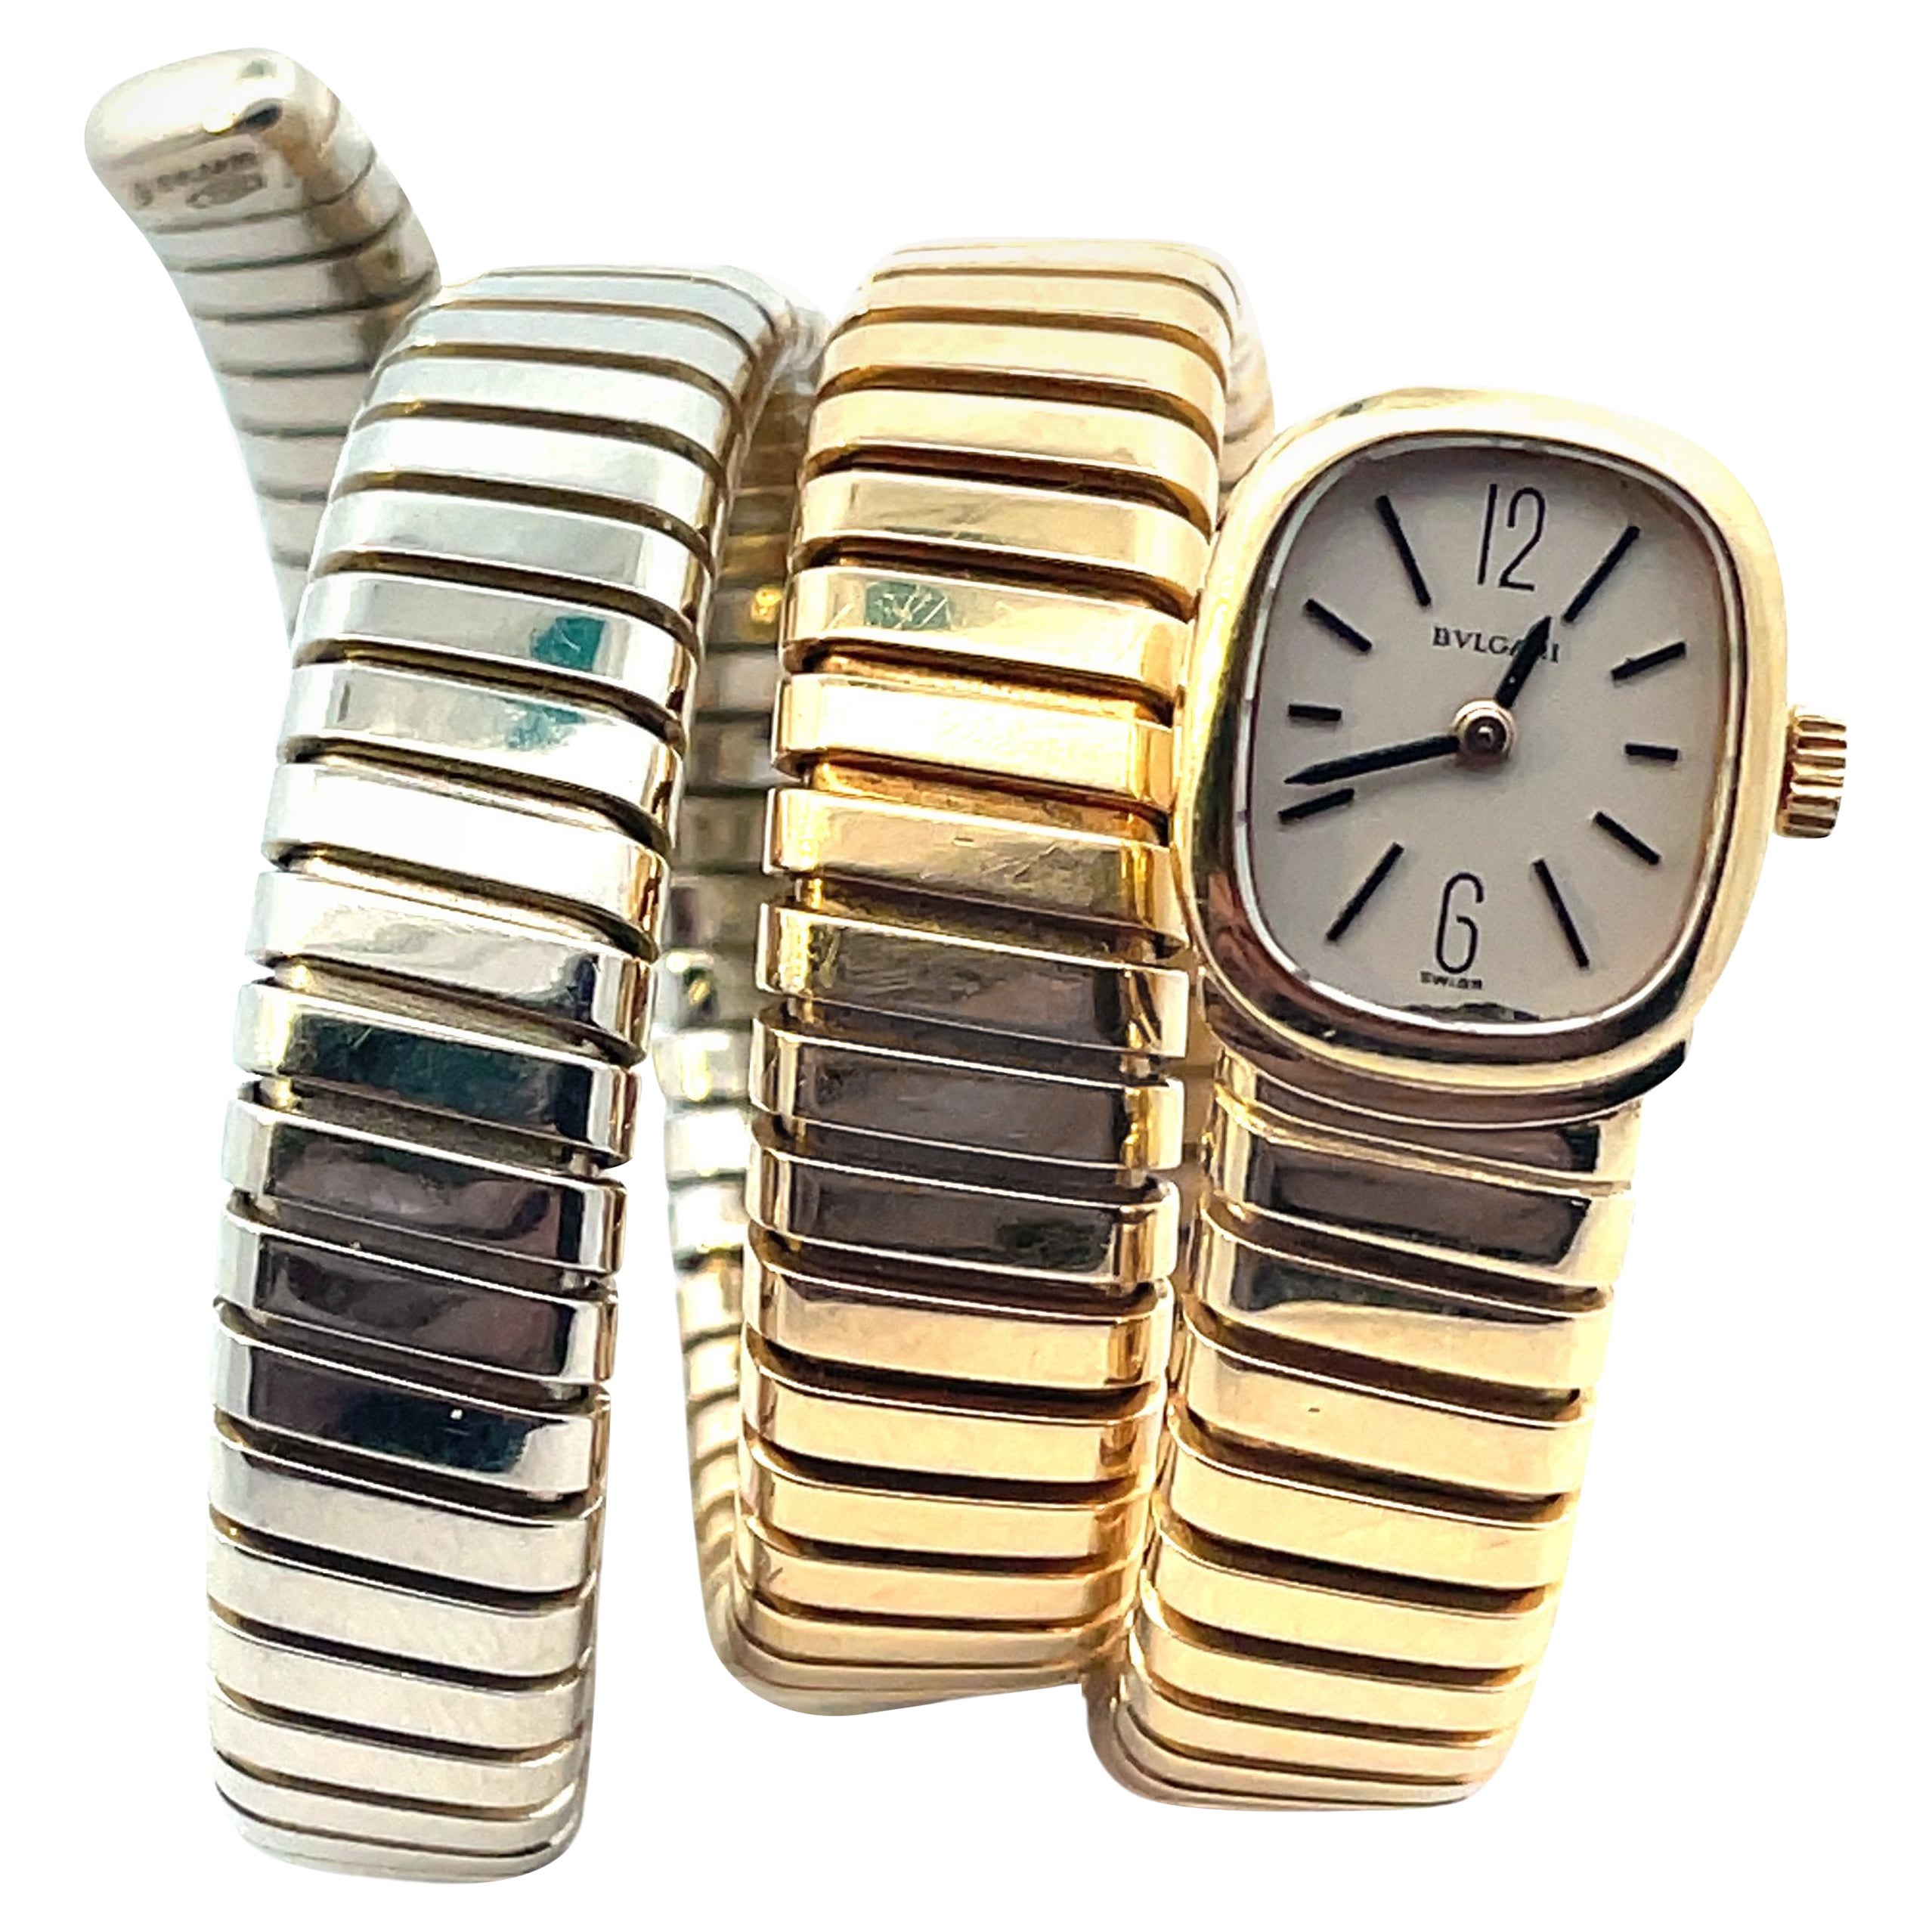 What are rectangular watches called?